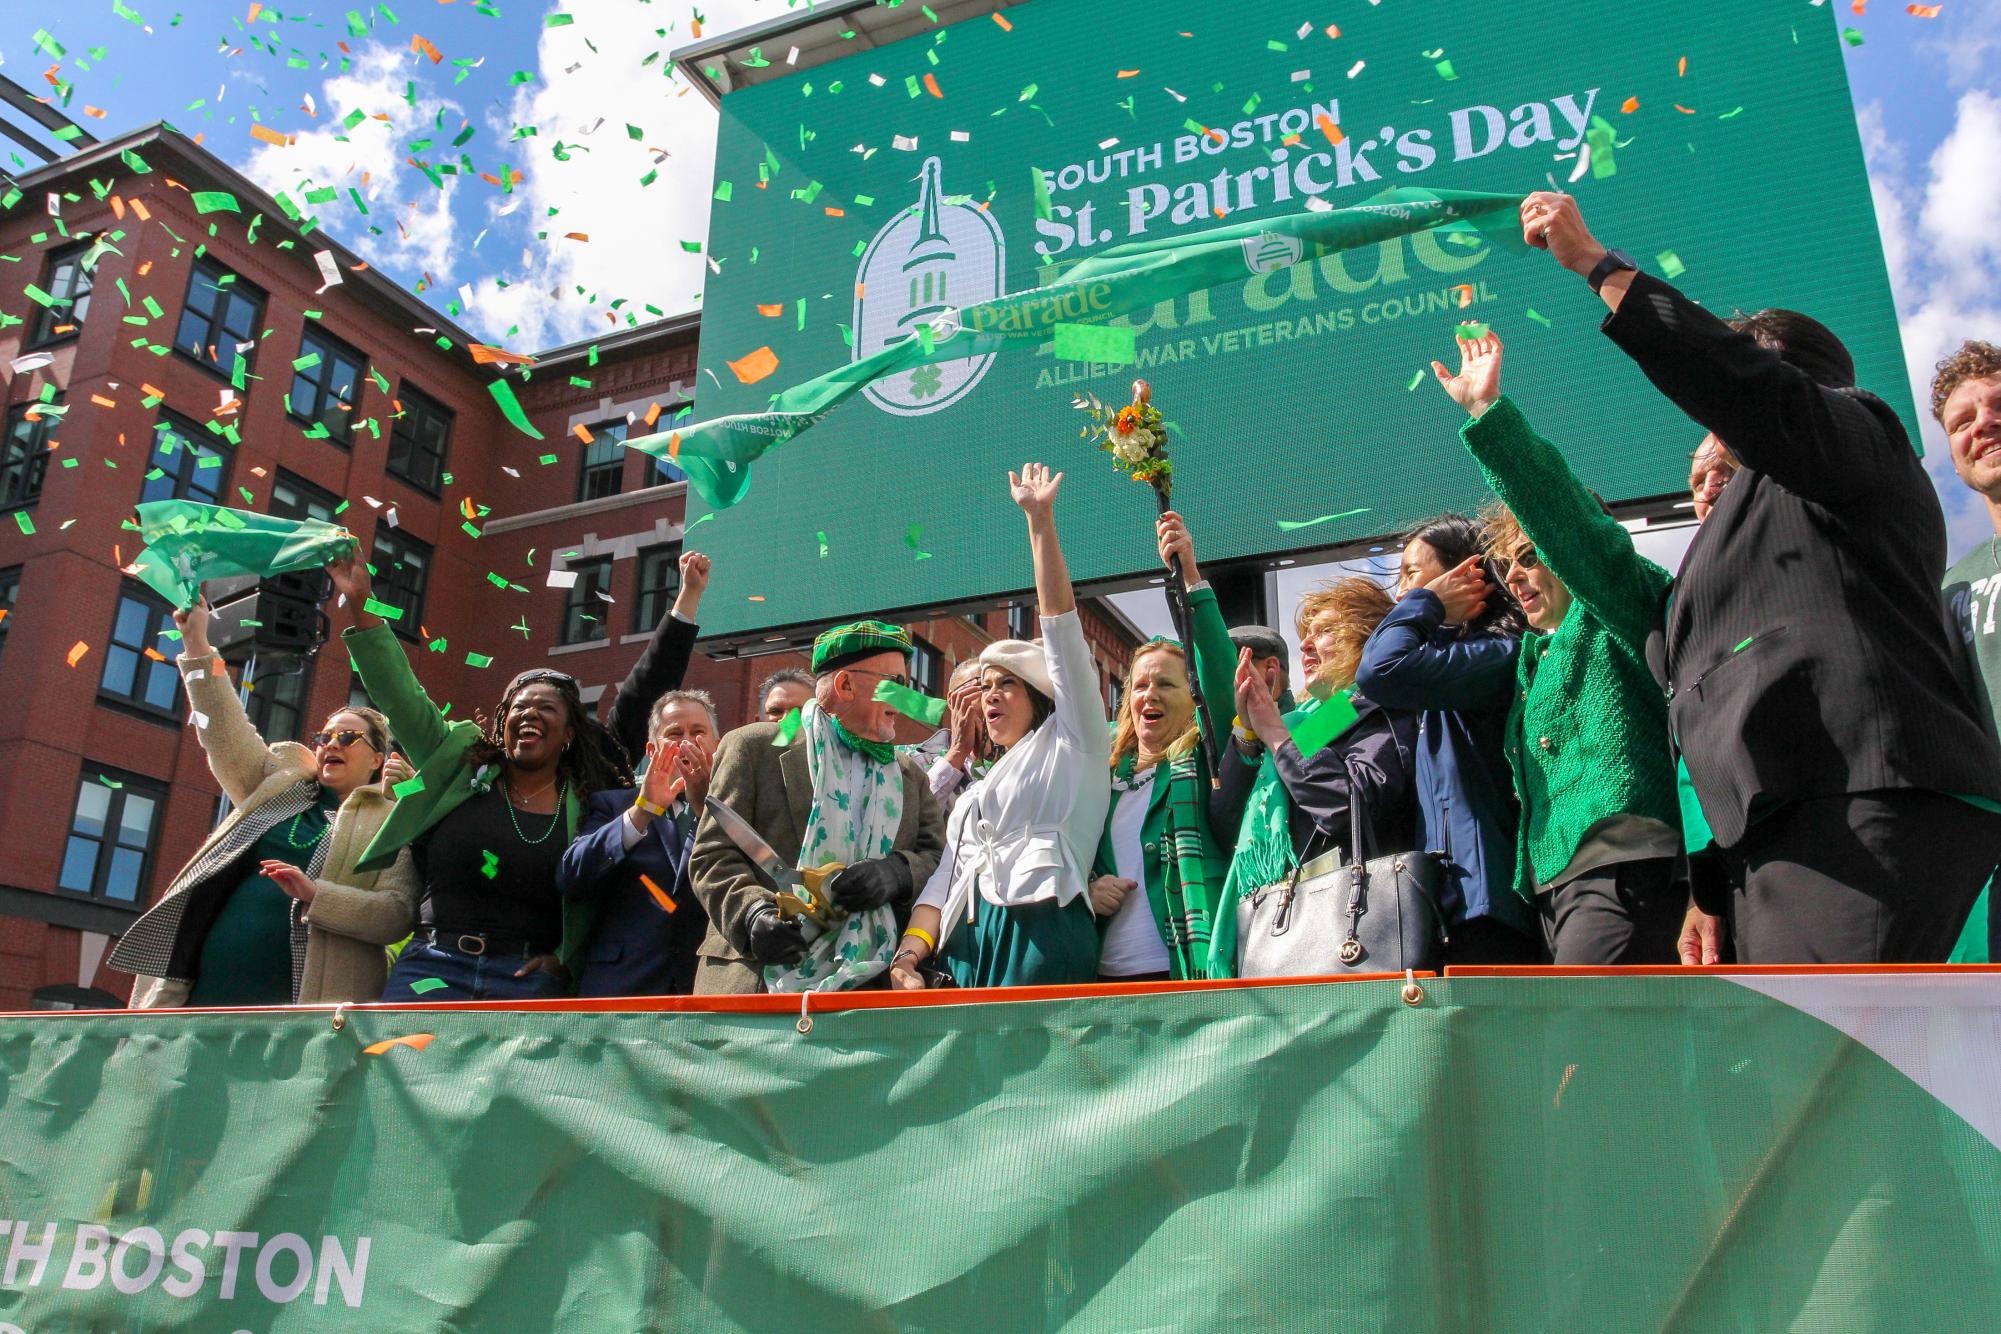 The+2024+St.+Patrick%E2%80%99s+Day%2FEvacuation+Day+Parade+brought+a+sea+of+Irish+green+to+South+Boston+on+Sunday%2C+March+17.+Take+a+look+at+some+of+the+parade+scenes+that+our+staff+photographers+captured+last+week.